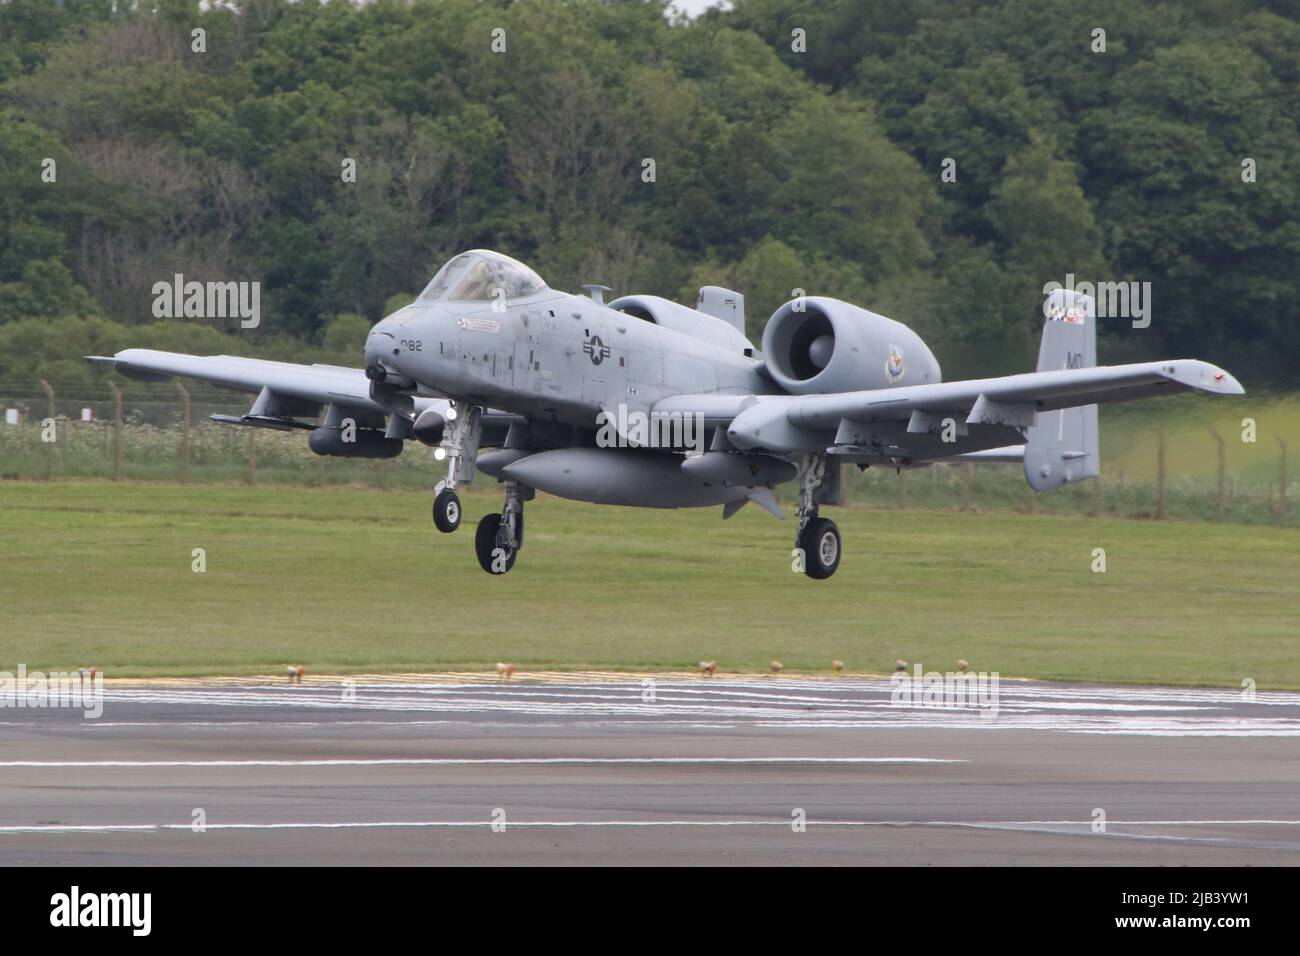 79-0082, a Fairchild Republic A-10C Thunderbolt II (or Warthog) operated by the 175th Wing of the Maryland Air National Guard of the United States Air Force, arriving at Prestwick International Airport in Ayrshire. The aircraft was one of ten A-10Cs routing through Prestwick on their journey from Latvia back to the USA, after participating in Exercise Swift Response. Stock Photo